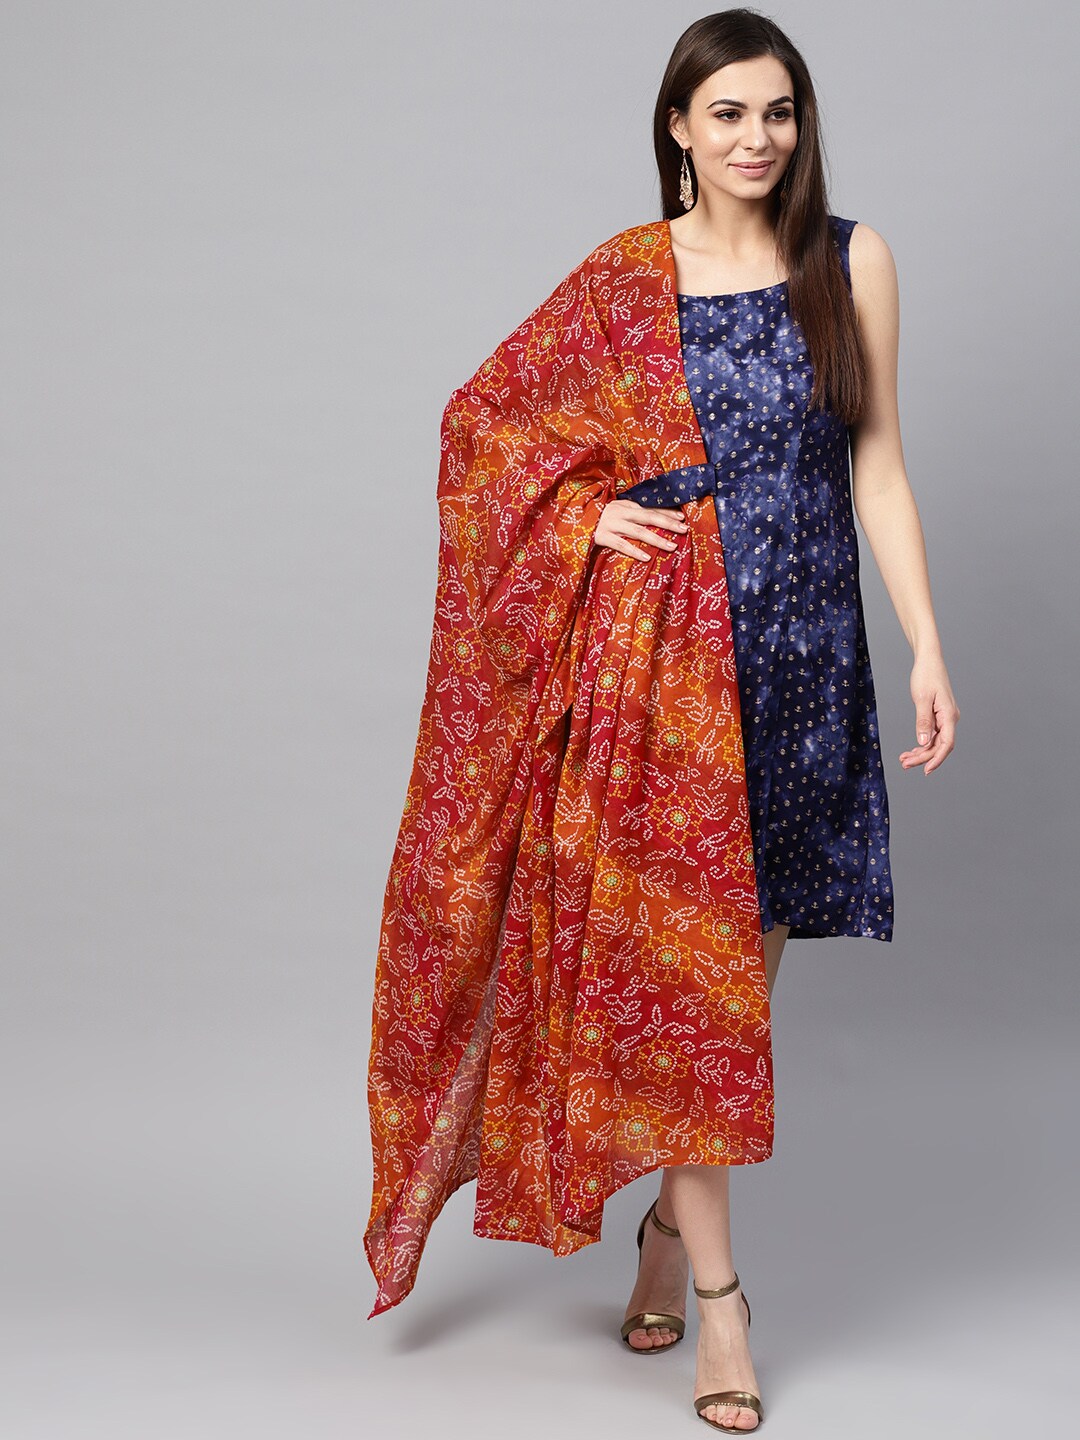 Blue Gold Printed Dress With Dupatta